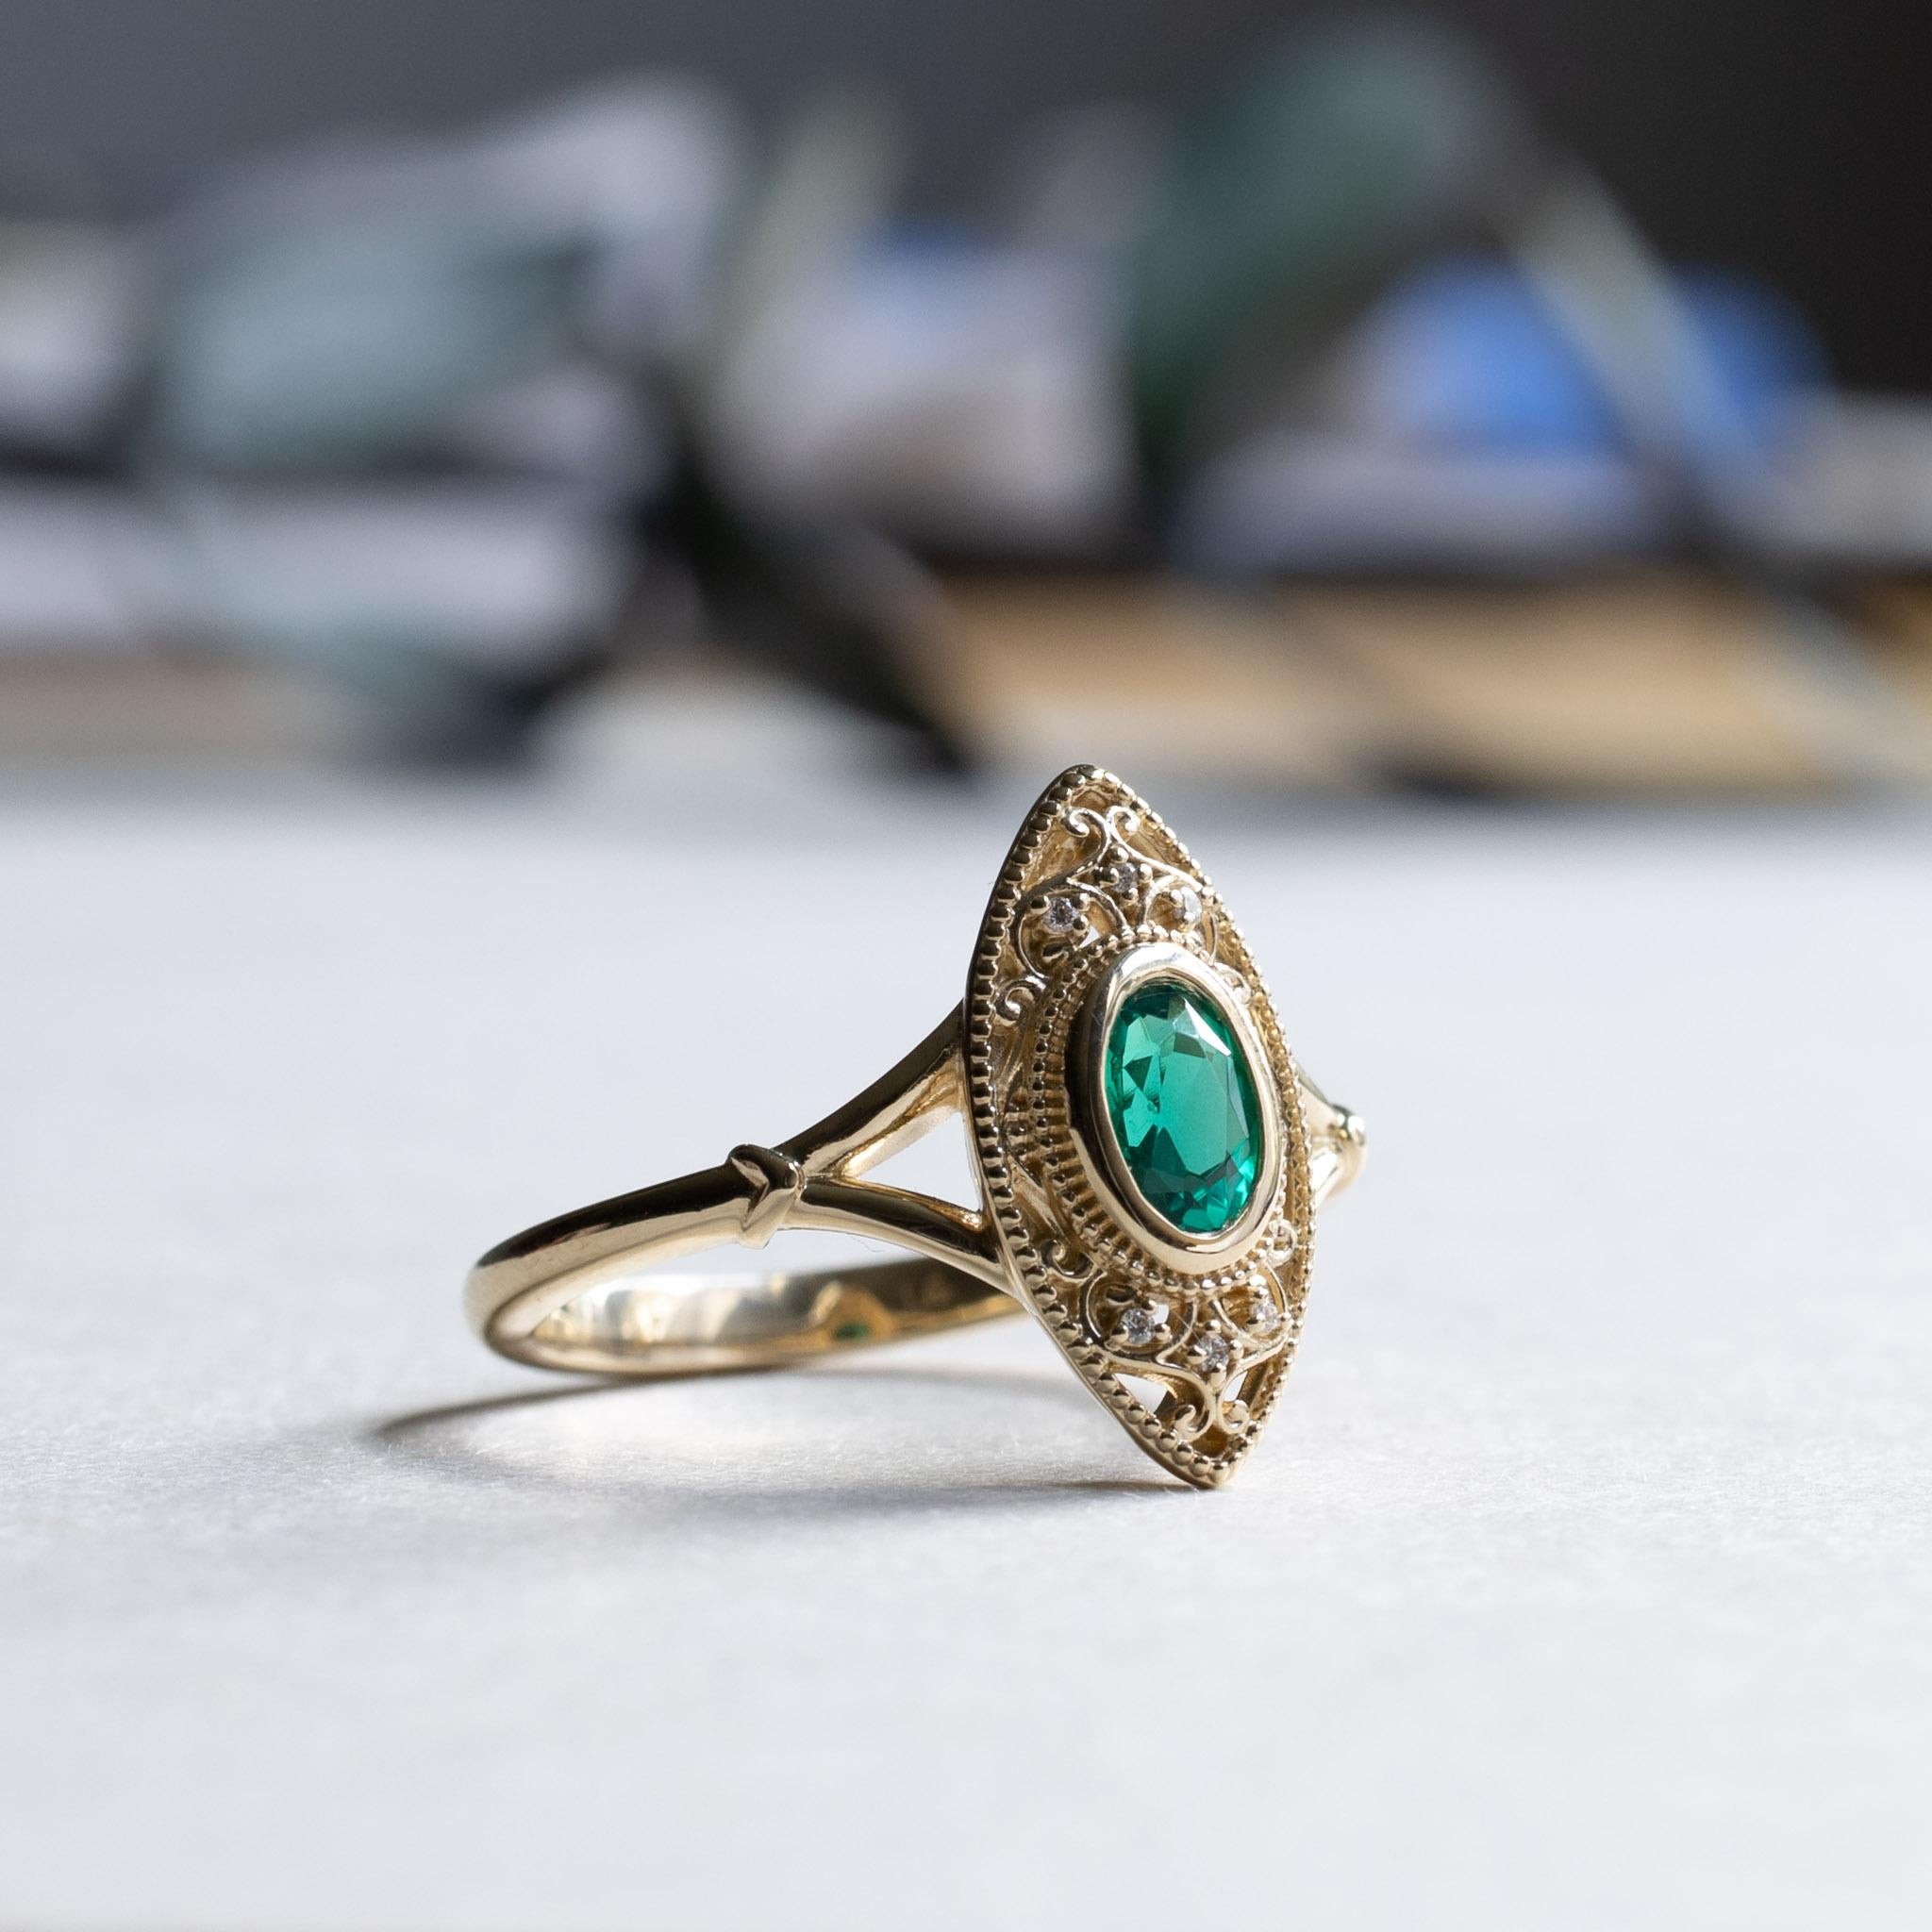 Oval emerald stone bezel with diamonds set on 14k yellow gold.
Stone Shape: Oval
Stone Type: Lab-created emerald
Metal Type: 14 Karat Yellow Gold
Stone size: 4mm x 6mm
Band width: 1.7mm
Accent Stones: Lab Diamonds
Lab Diamond Clarity: SI1-SI2
Lab